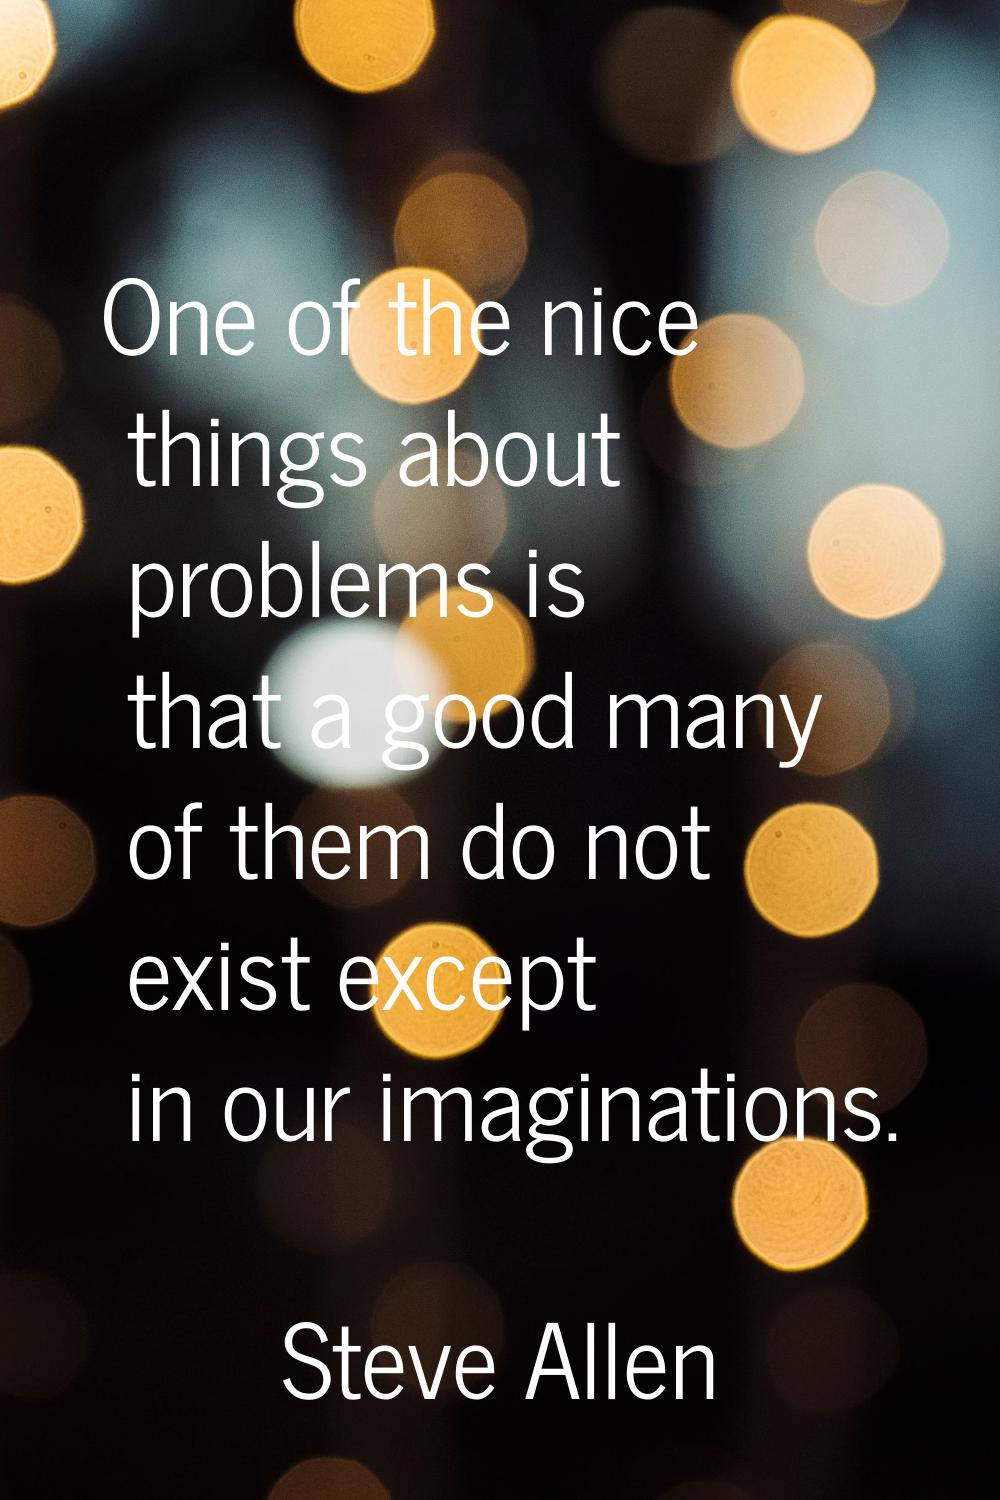 One of the nice things about problems is that a good many of them do not exist except in our imagin